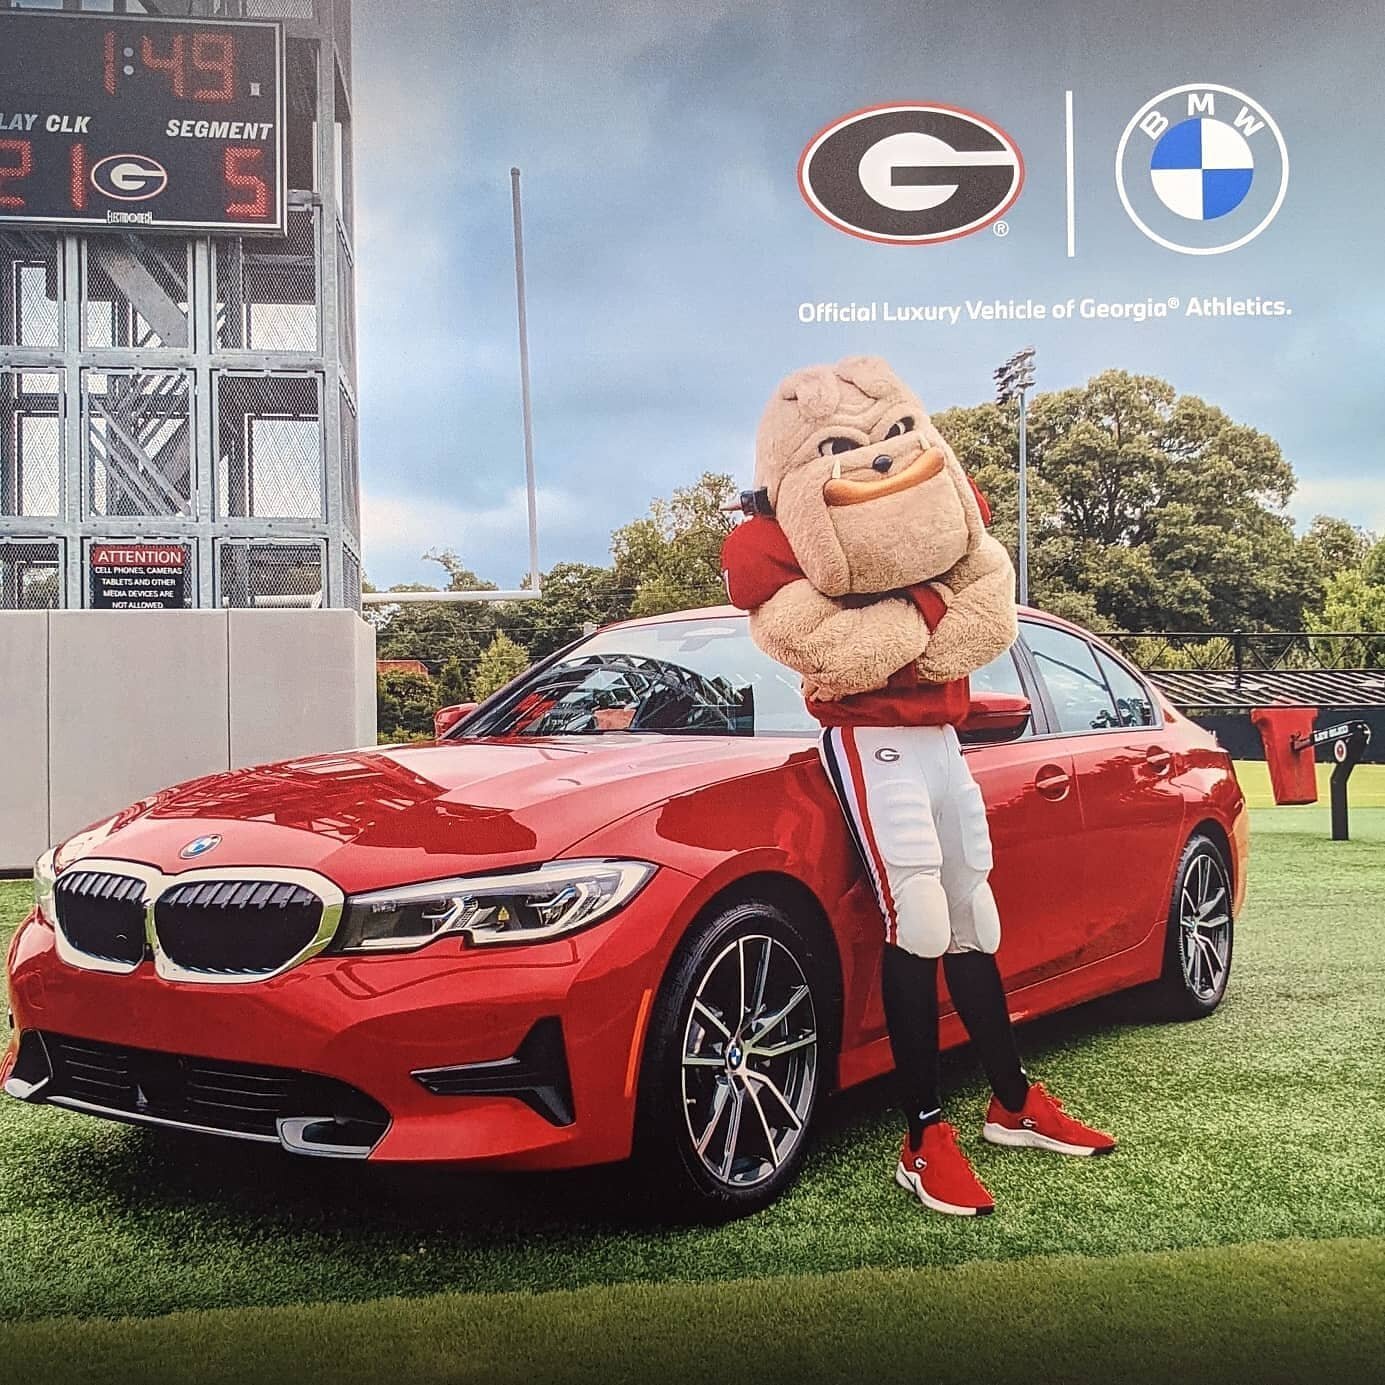 Let's do G Day 2021! Come see me at the Dawg Walk! 
@bmw_atl

#dawgcast #ugafootball #uga #georgiabulldogs #dawgs #godawgs #sicem #bulldogsfootball #gabulldogs #sanfordstadium #silverbritches #howboutthemdawgs